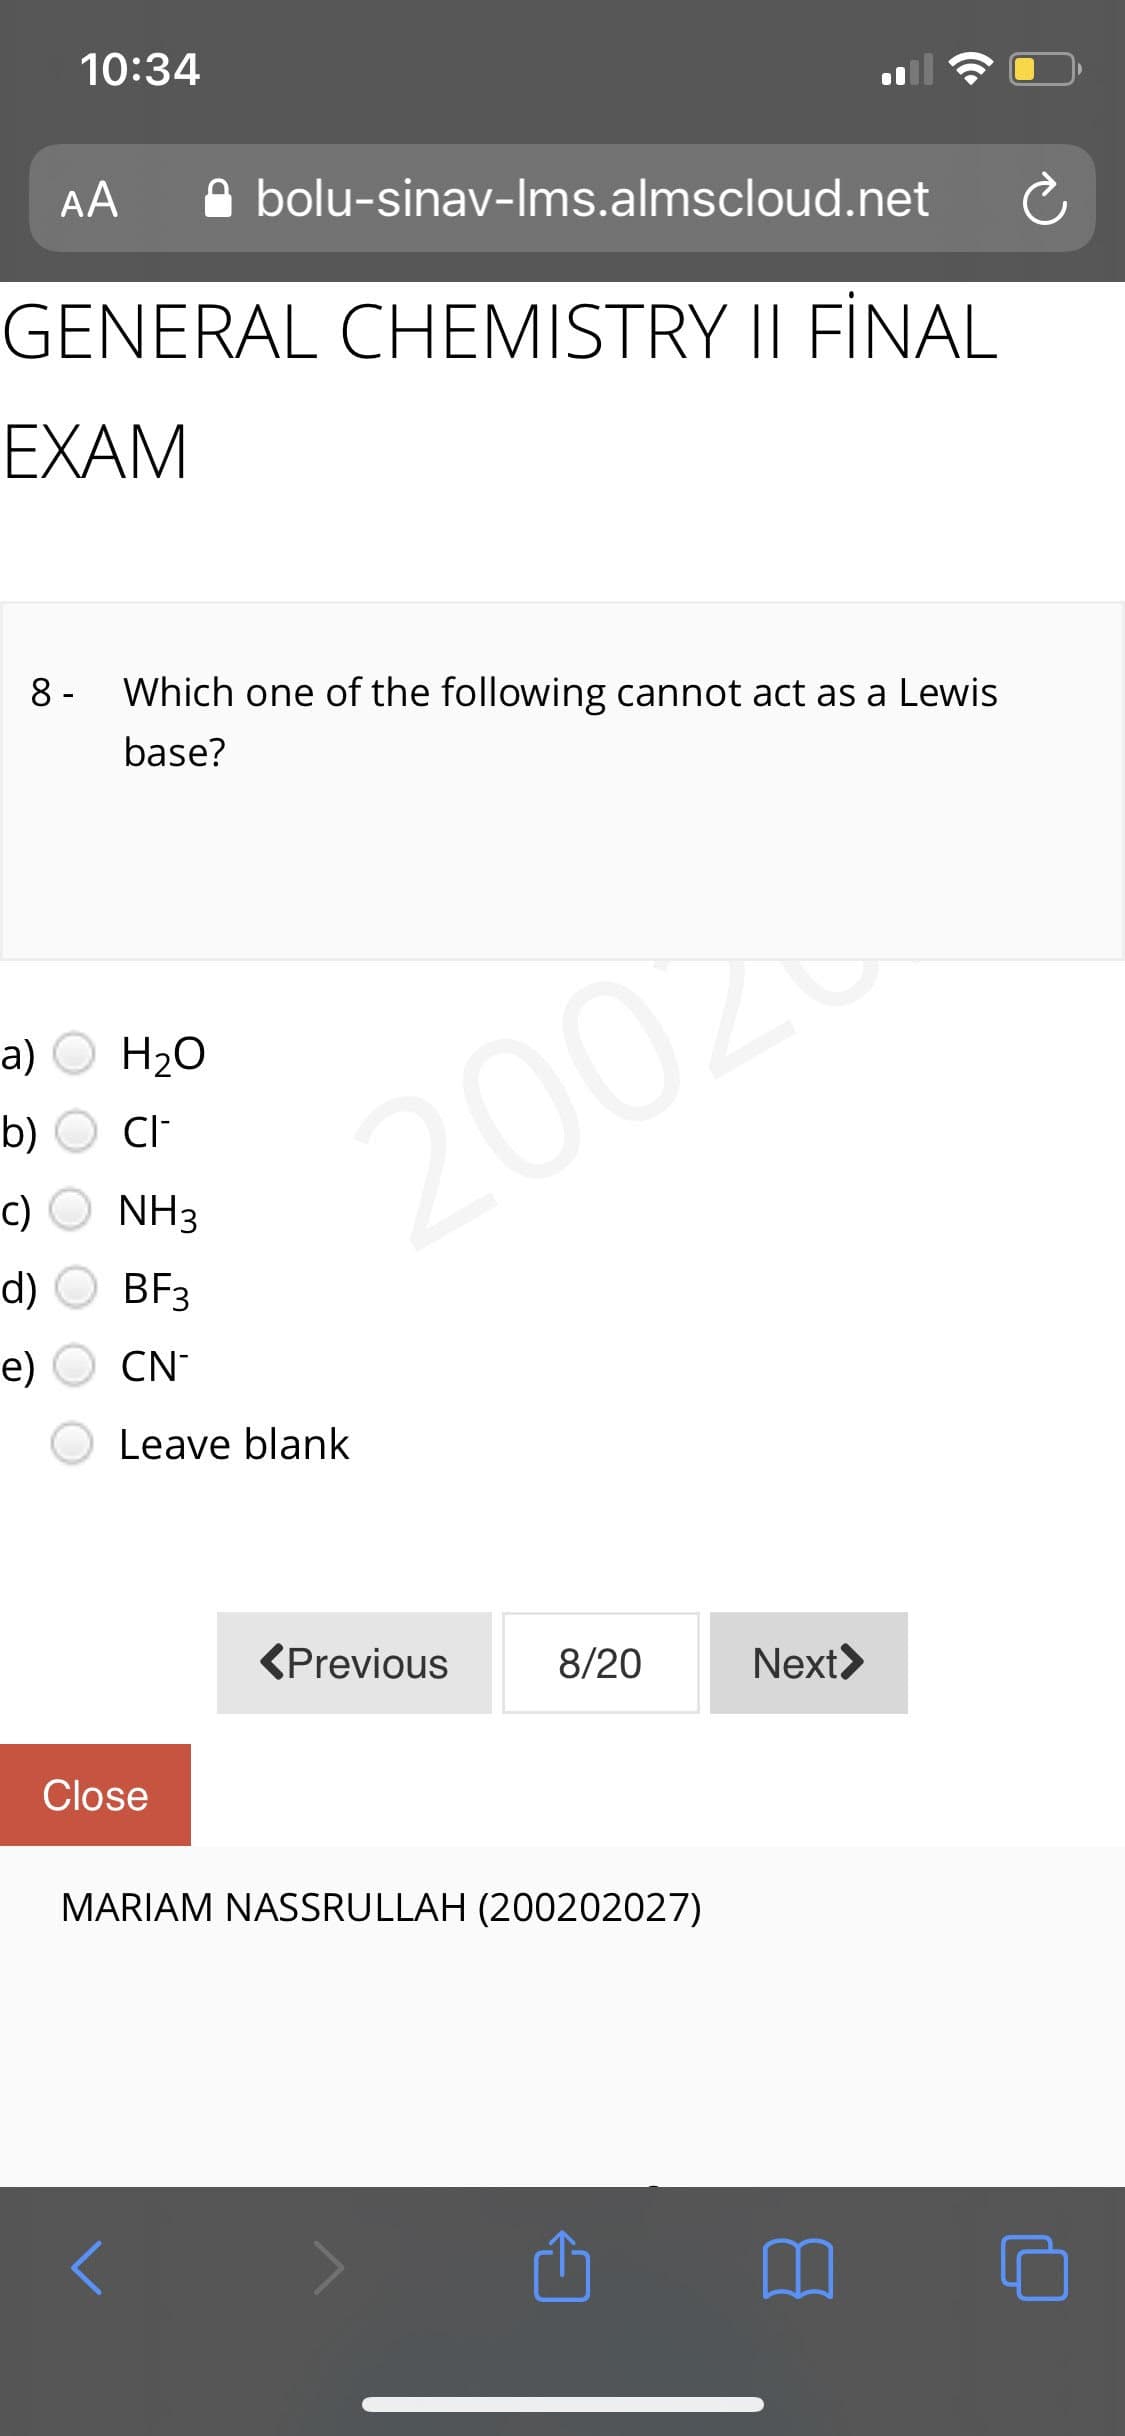 10:34
AA
A bolu-sinav-Ims.almscloud.net
GENERAL CHEMISTRY II FİNAL
EXAM
8 -
Which one of the following cannot act as a Lewis
base?
a)
H20
2002
b)
CI
c)
NH3
d)
BF3
е)
CN-
Leave blank
<Previous
8/20
Next>
Close
MARIAM NASSRULLAH (200202027)
